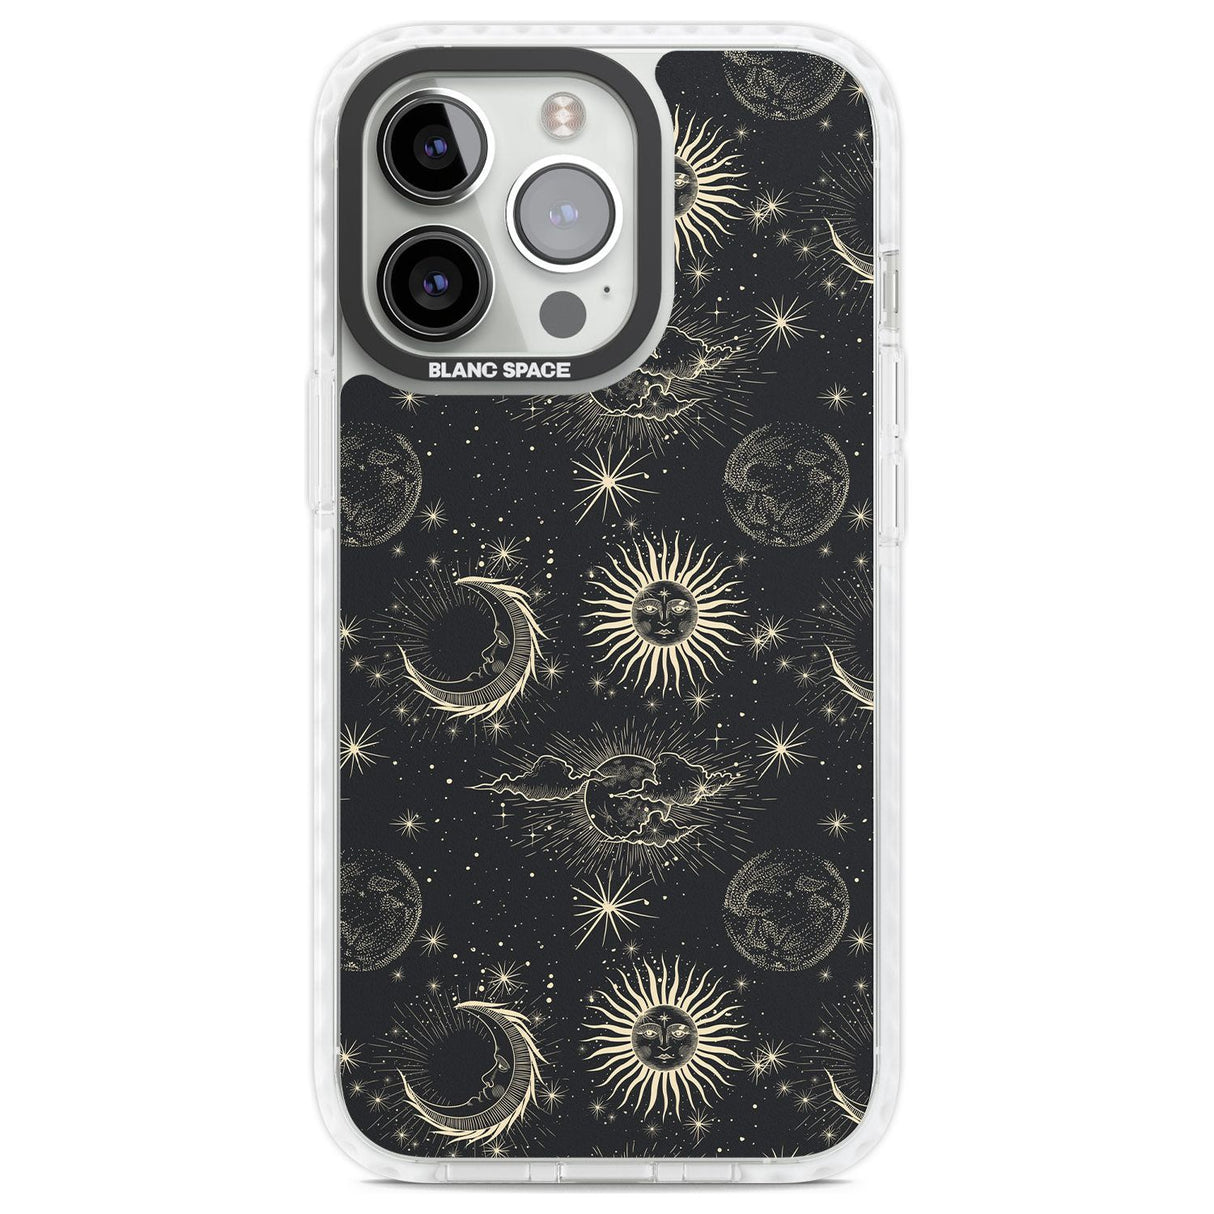 Large Suns, Moons & Clouds Astrological Phone Case iPhone 13 Pro / Impact Case,iPhone 14 Pro / Impact Case,iPhone 15 Pro Max / Impact Case,iPhone 15 Pro / Impact Case Blanc Space